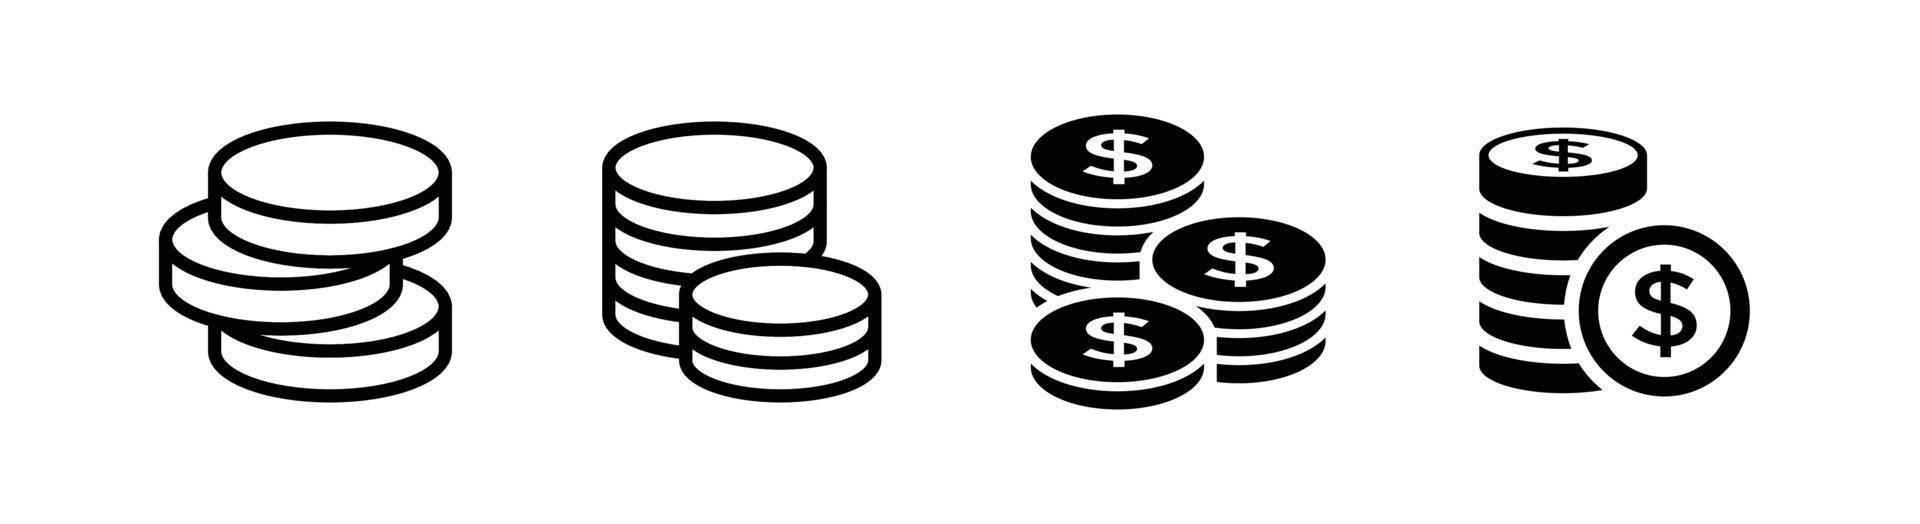 Coin icon set, outlined and flat style, pixel perfect vector